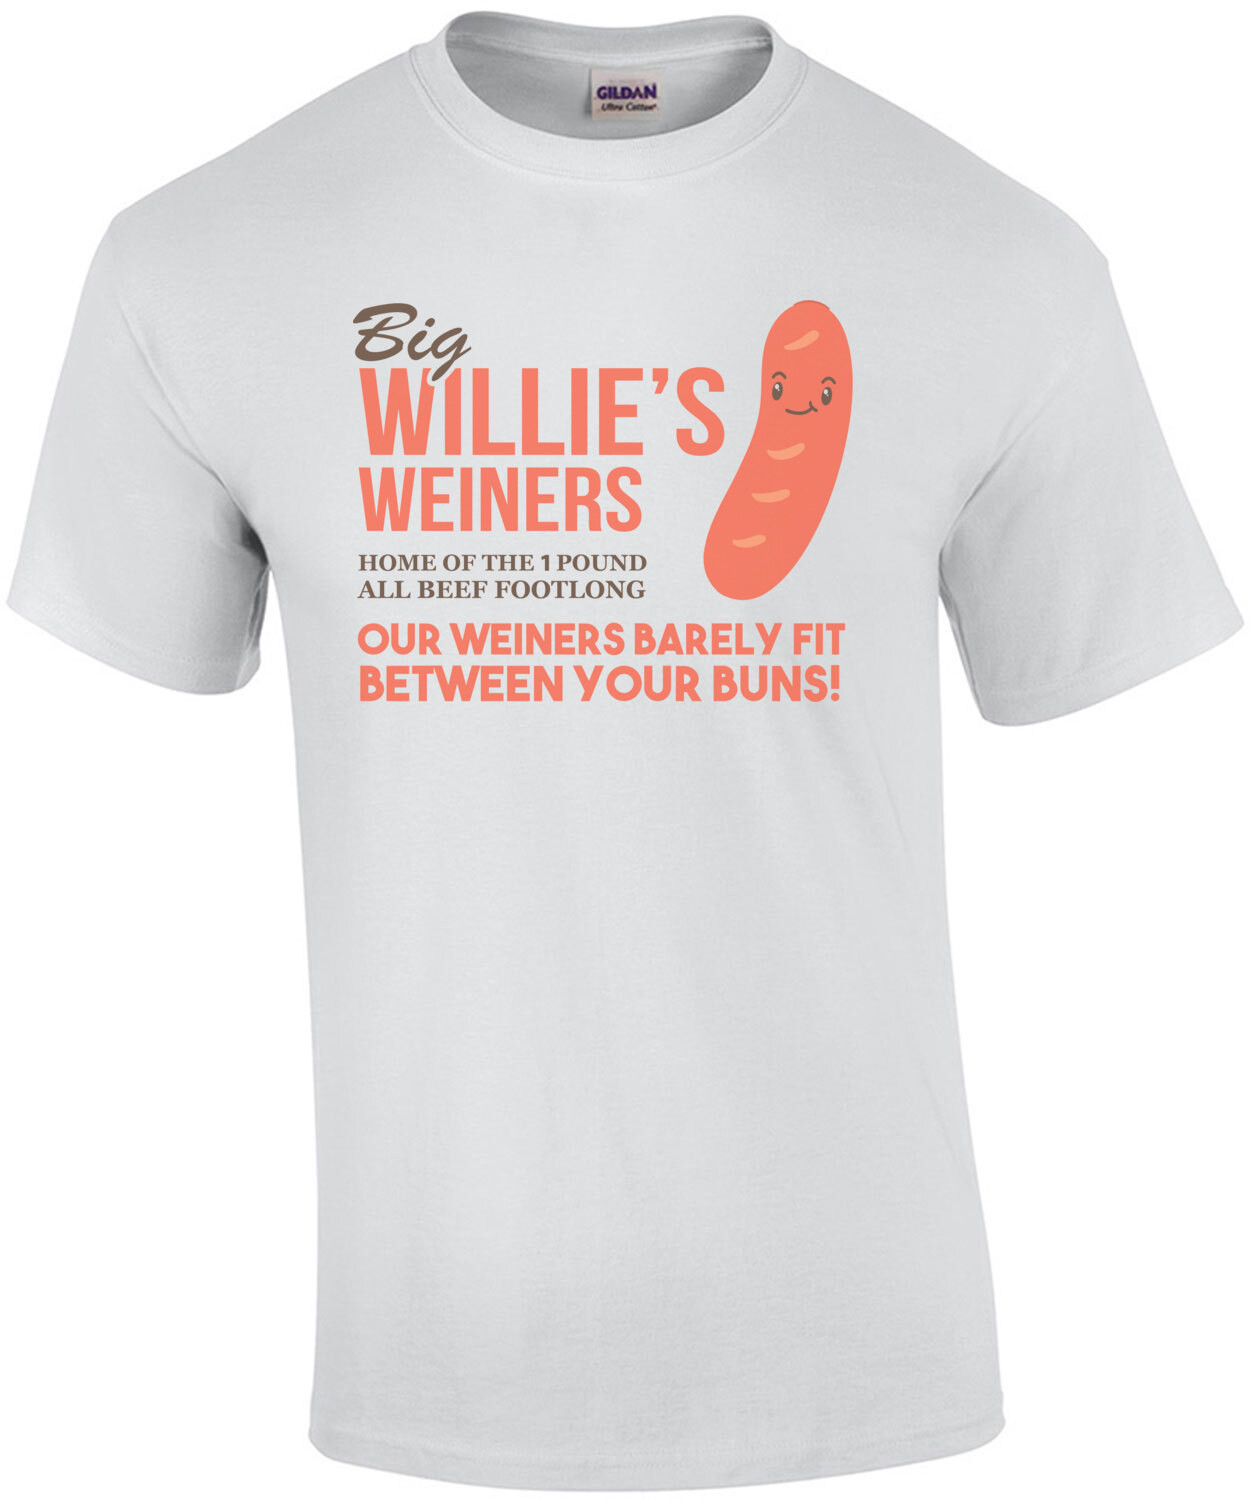 Big Willie's Weiners - Home of the 1 pound all beef footlong. Our weiners barely fit between your buns - funny sexual t-shirt